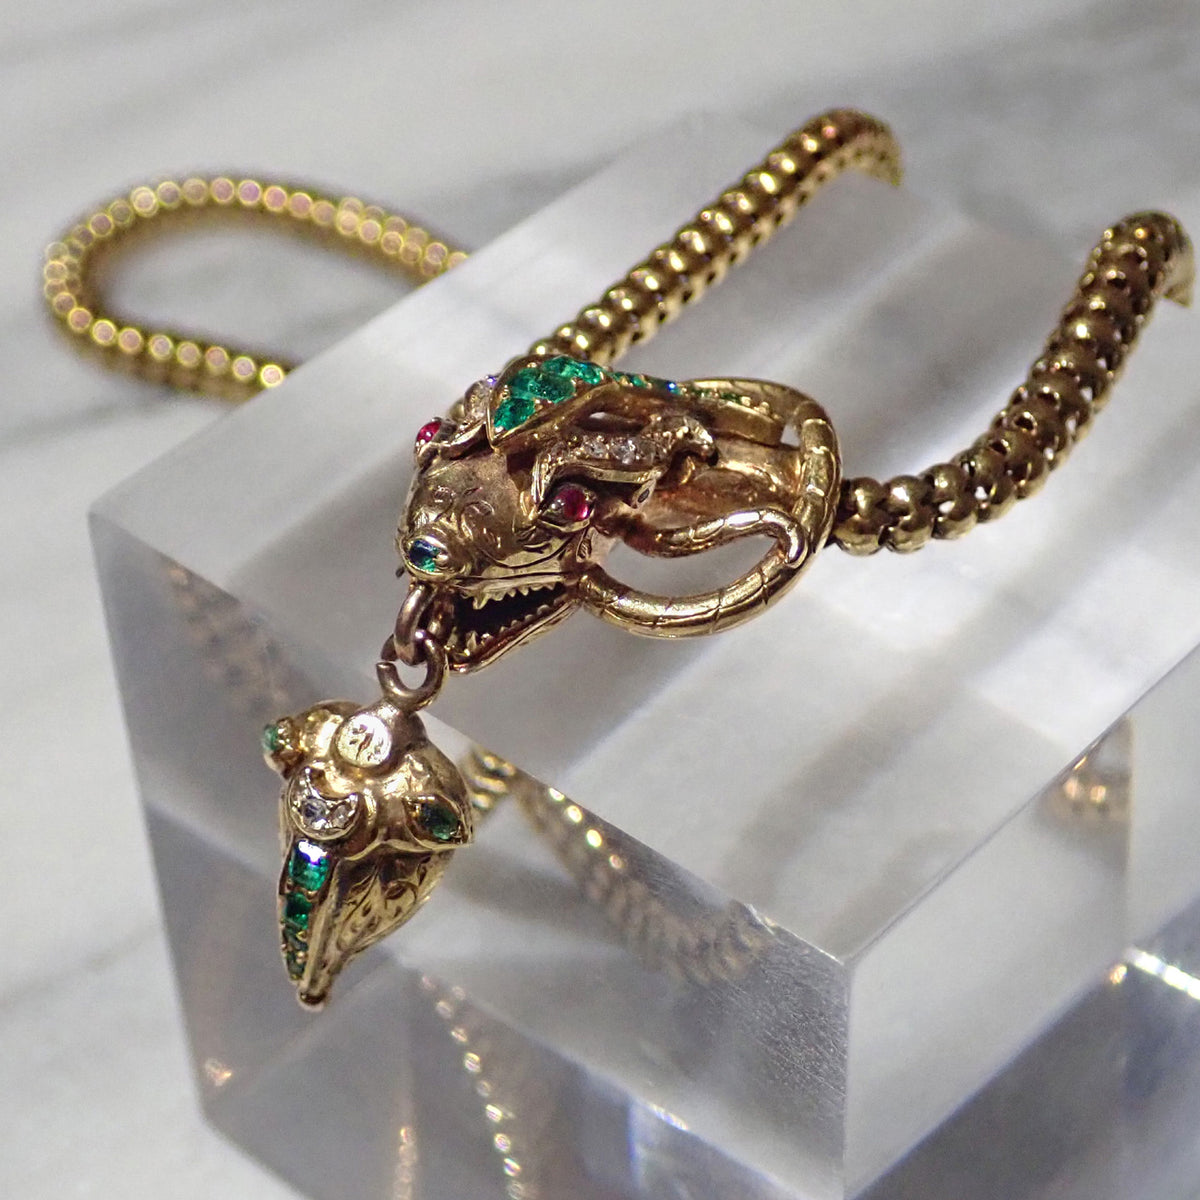 Victorian Emerald & Diamond Snake Necklace sold by Doyle & Doyle an antique & vintage jewelry boutique.